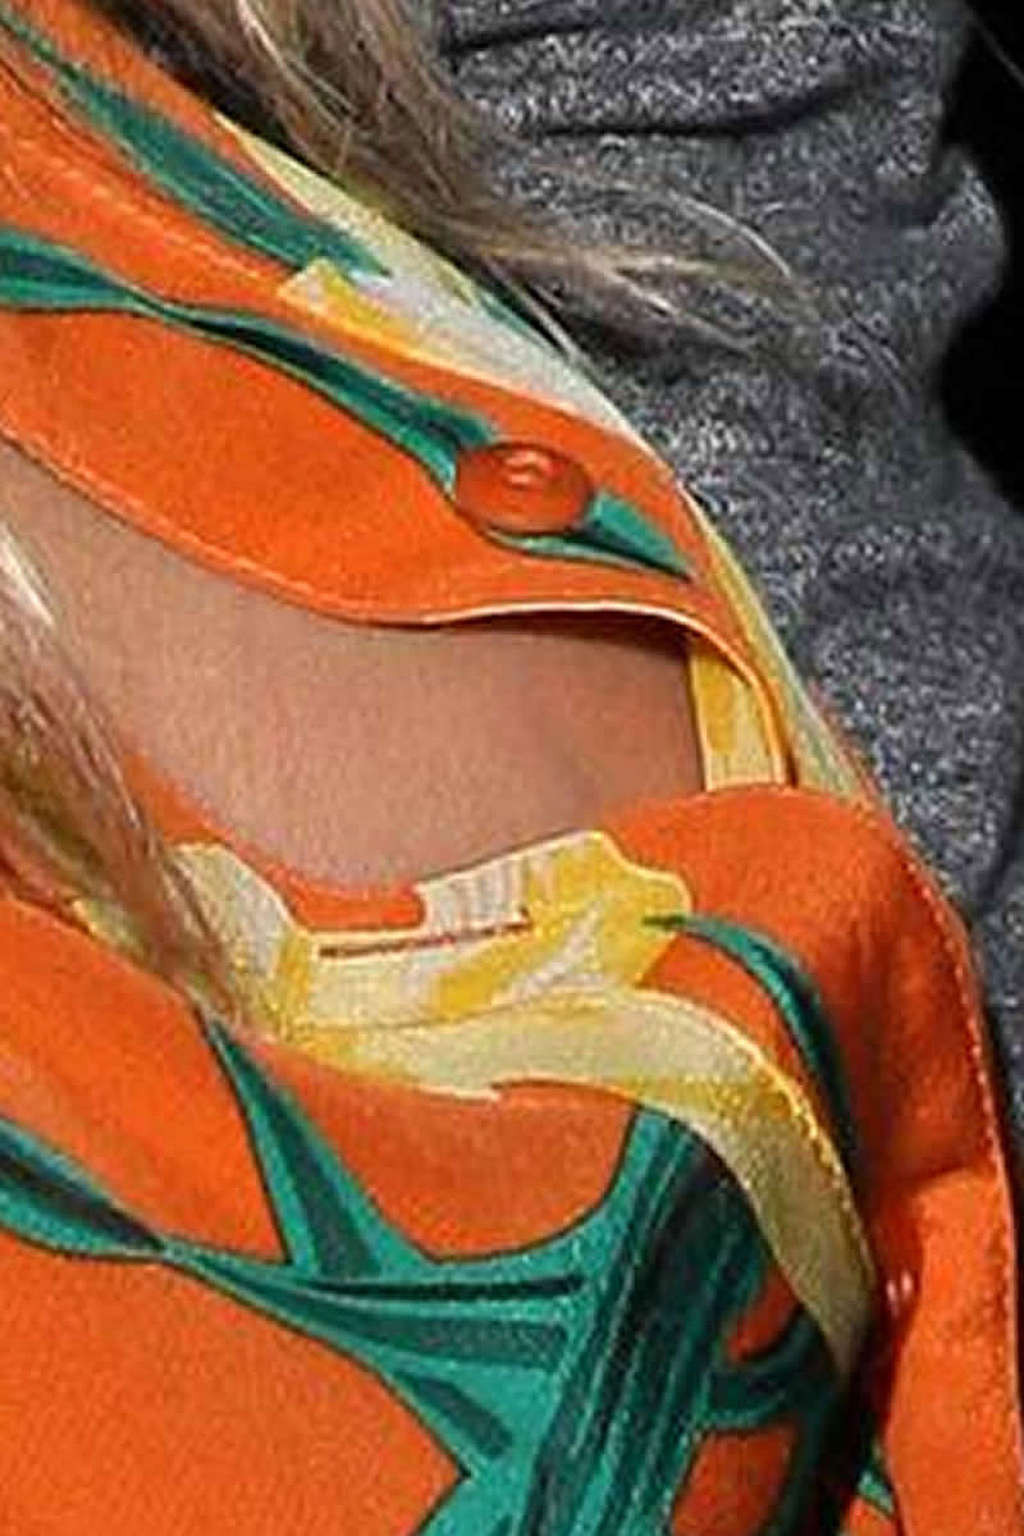 Jessica Simpson nipple slip and ass exposed upskirt paparazzi pictures #75364239